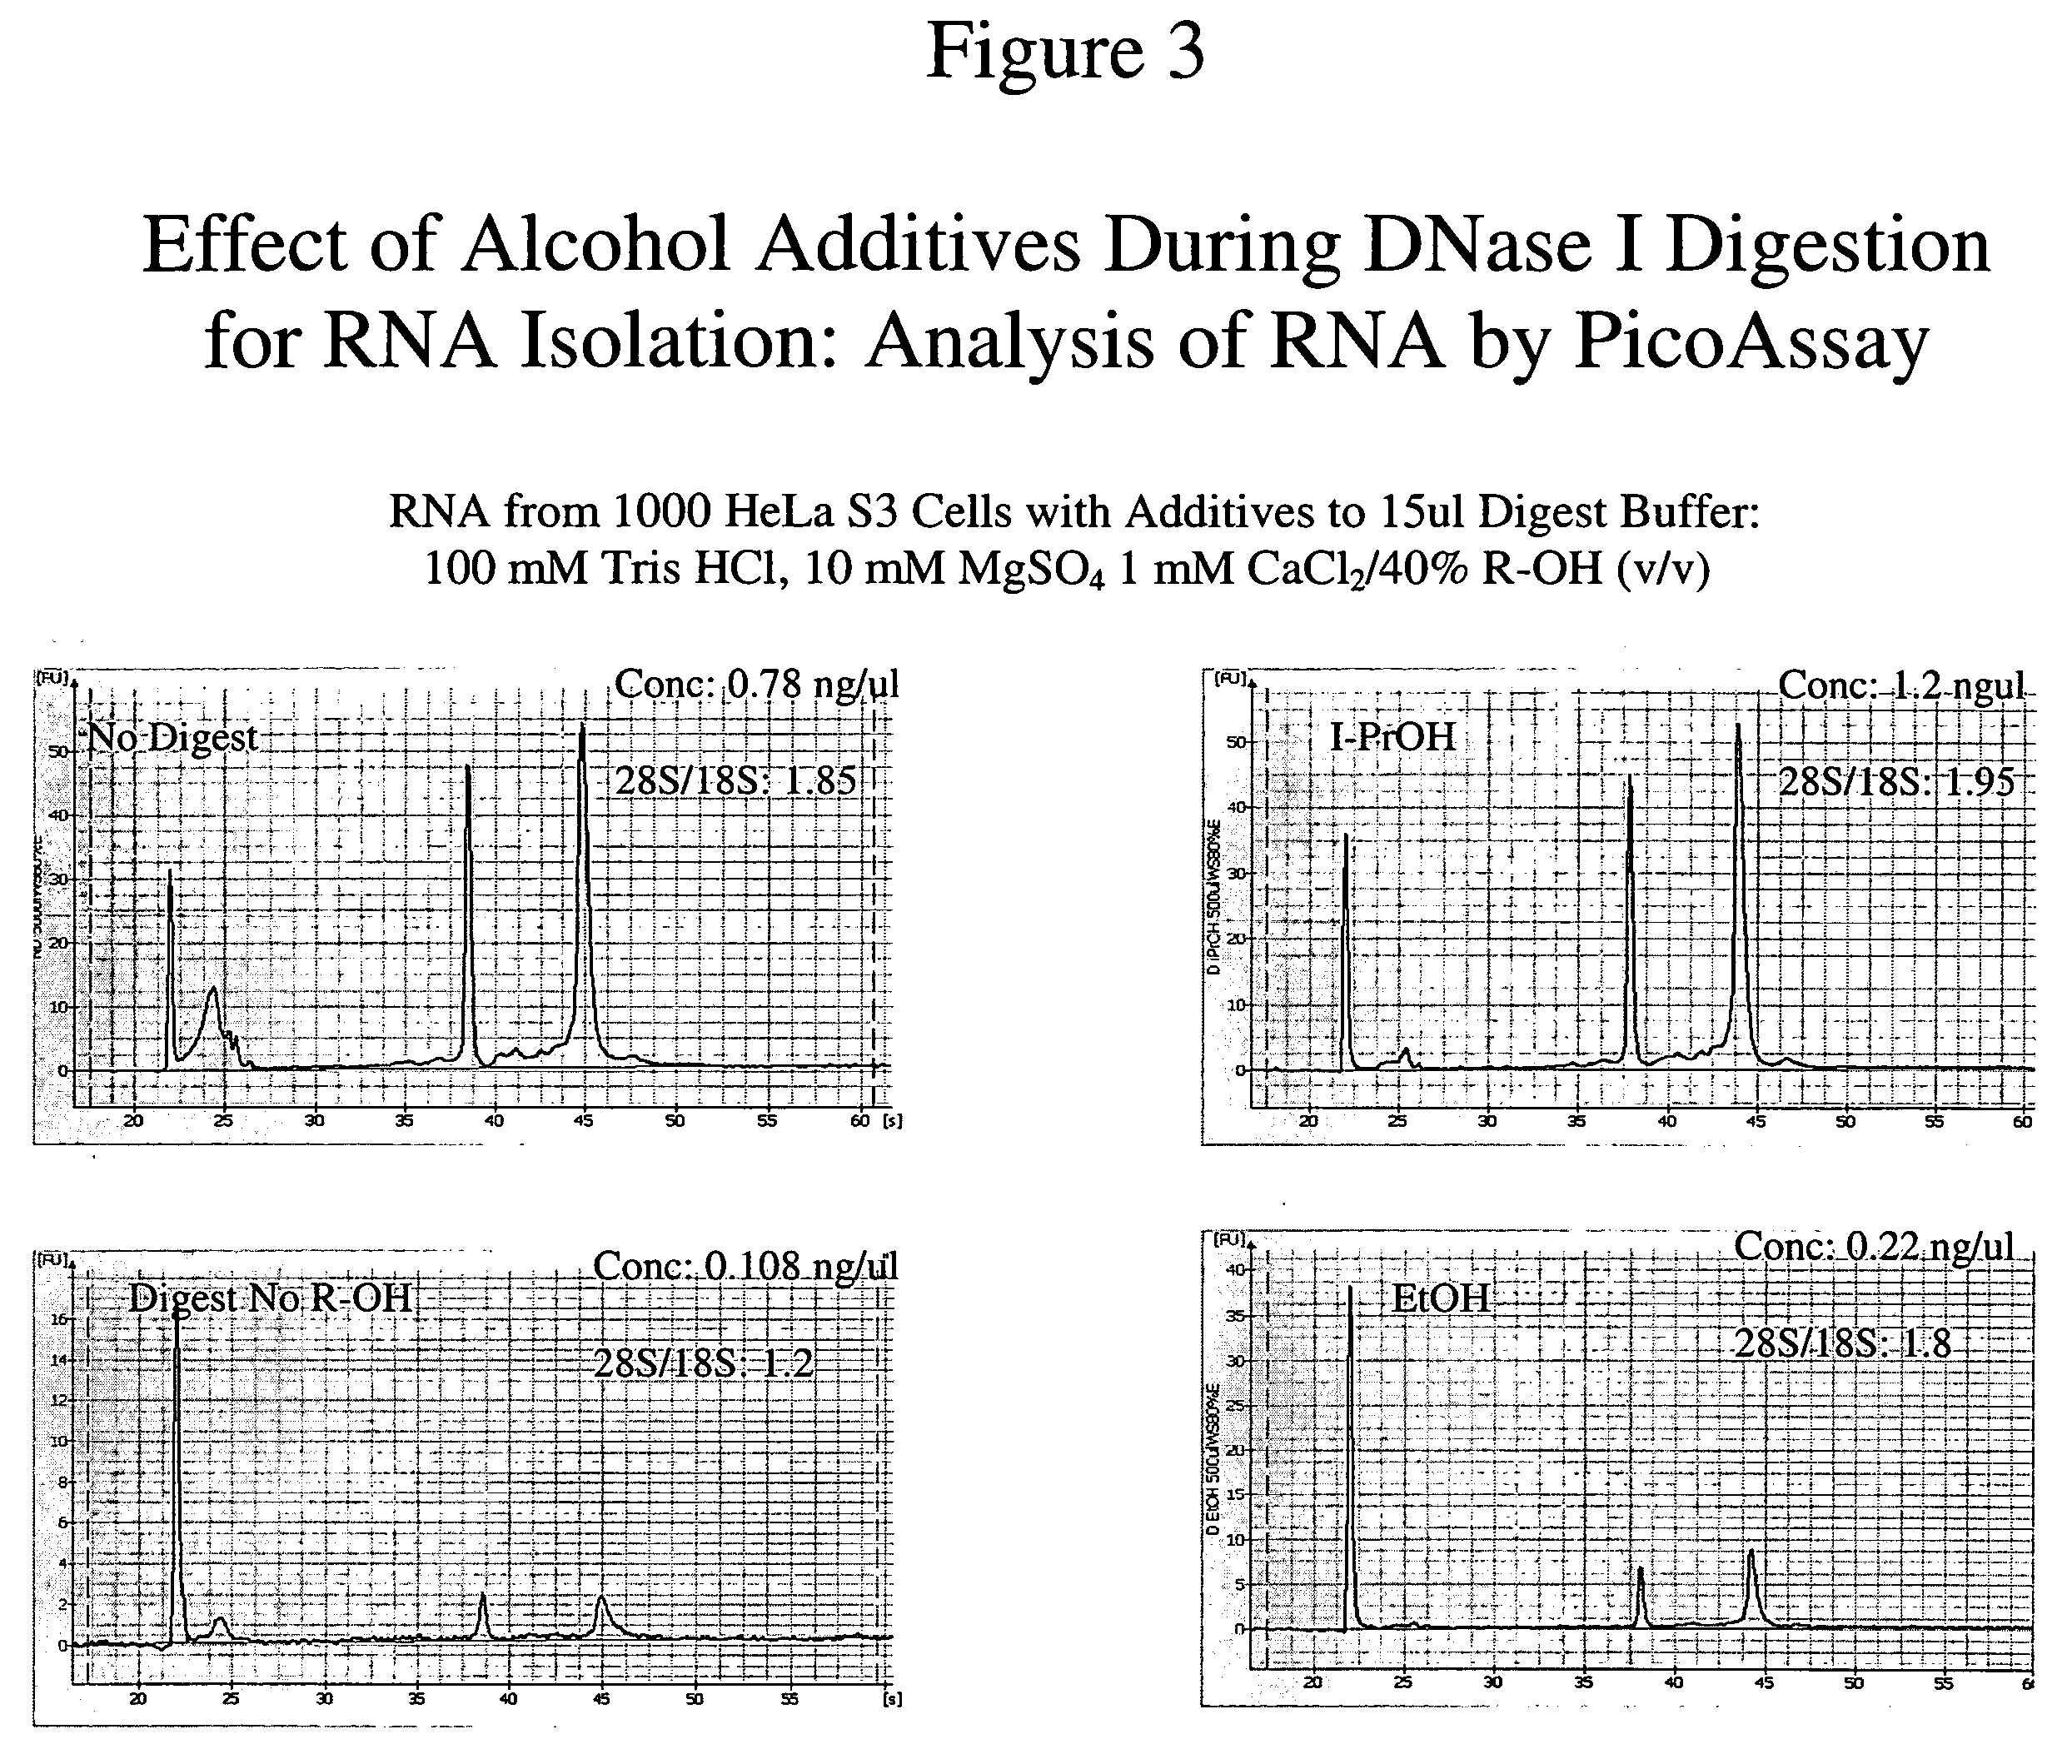 Methods of using a DNase I-like enzyme